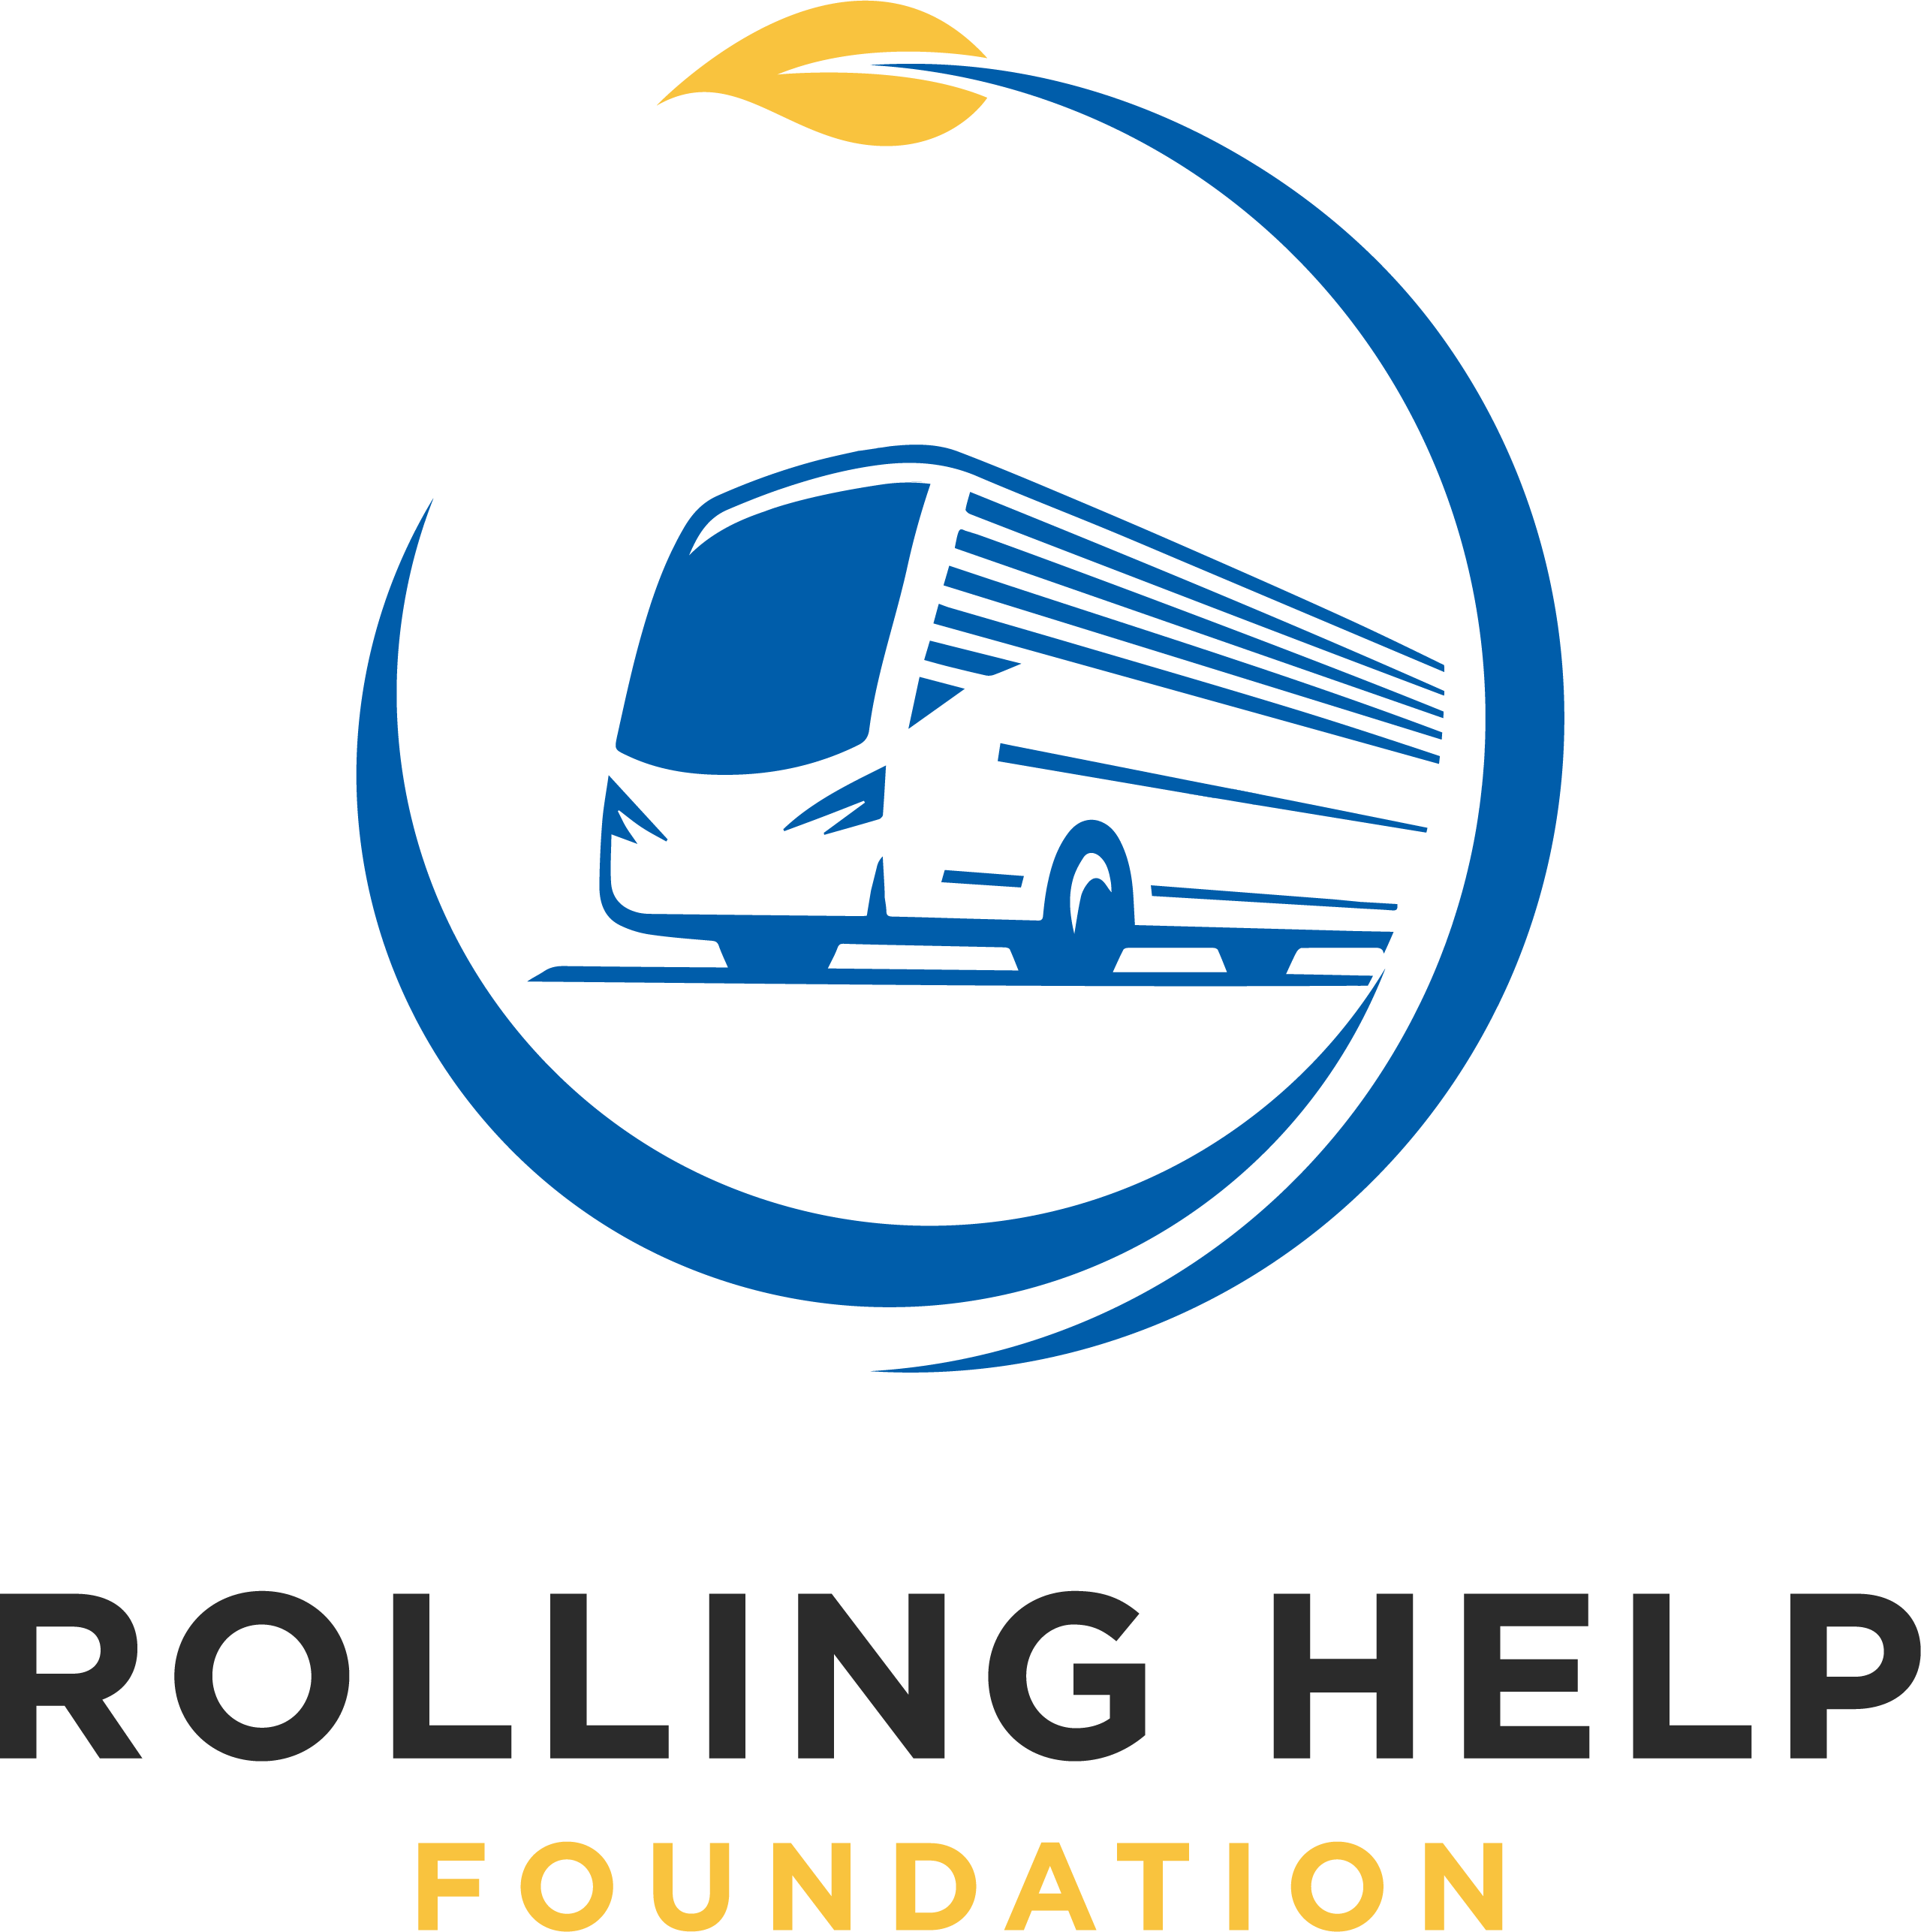 Rolling Help foundation